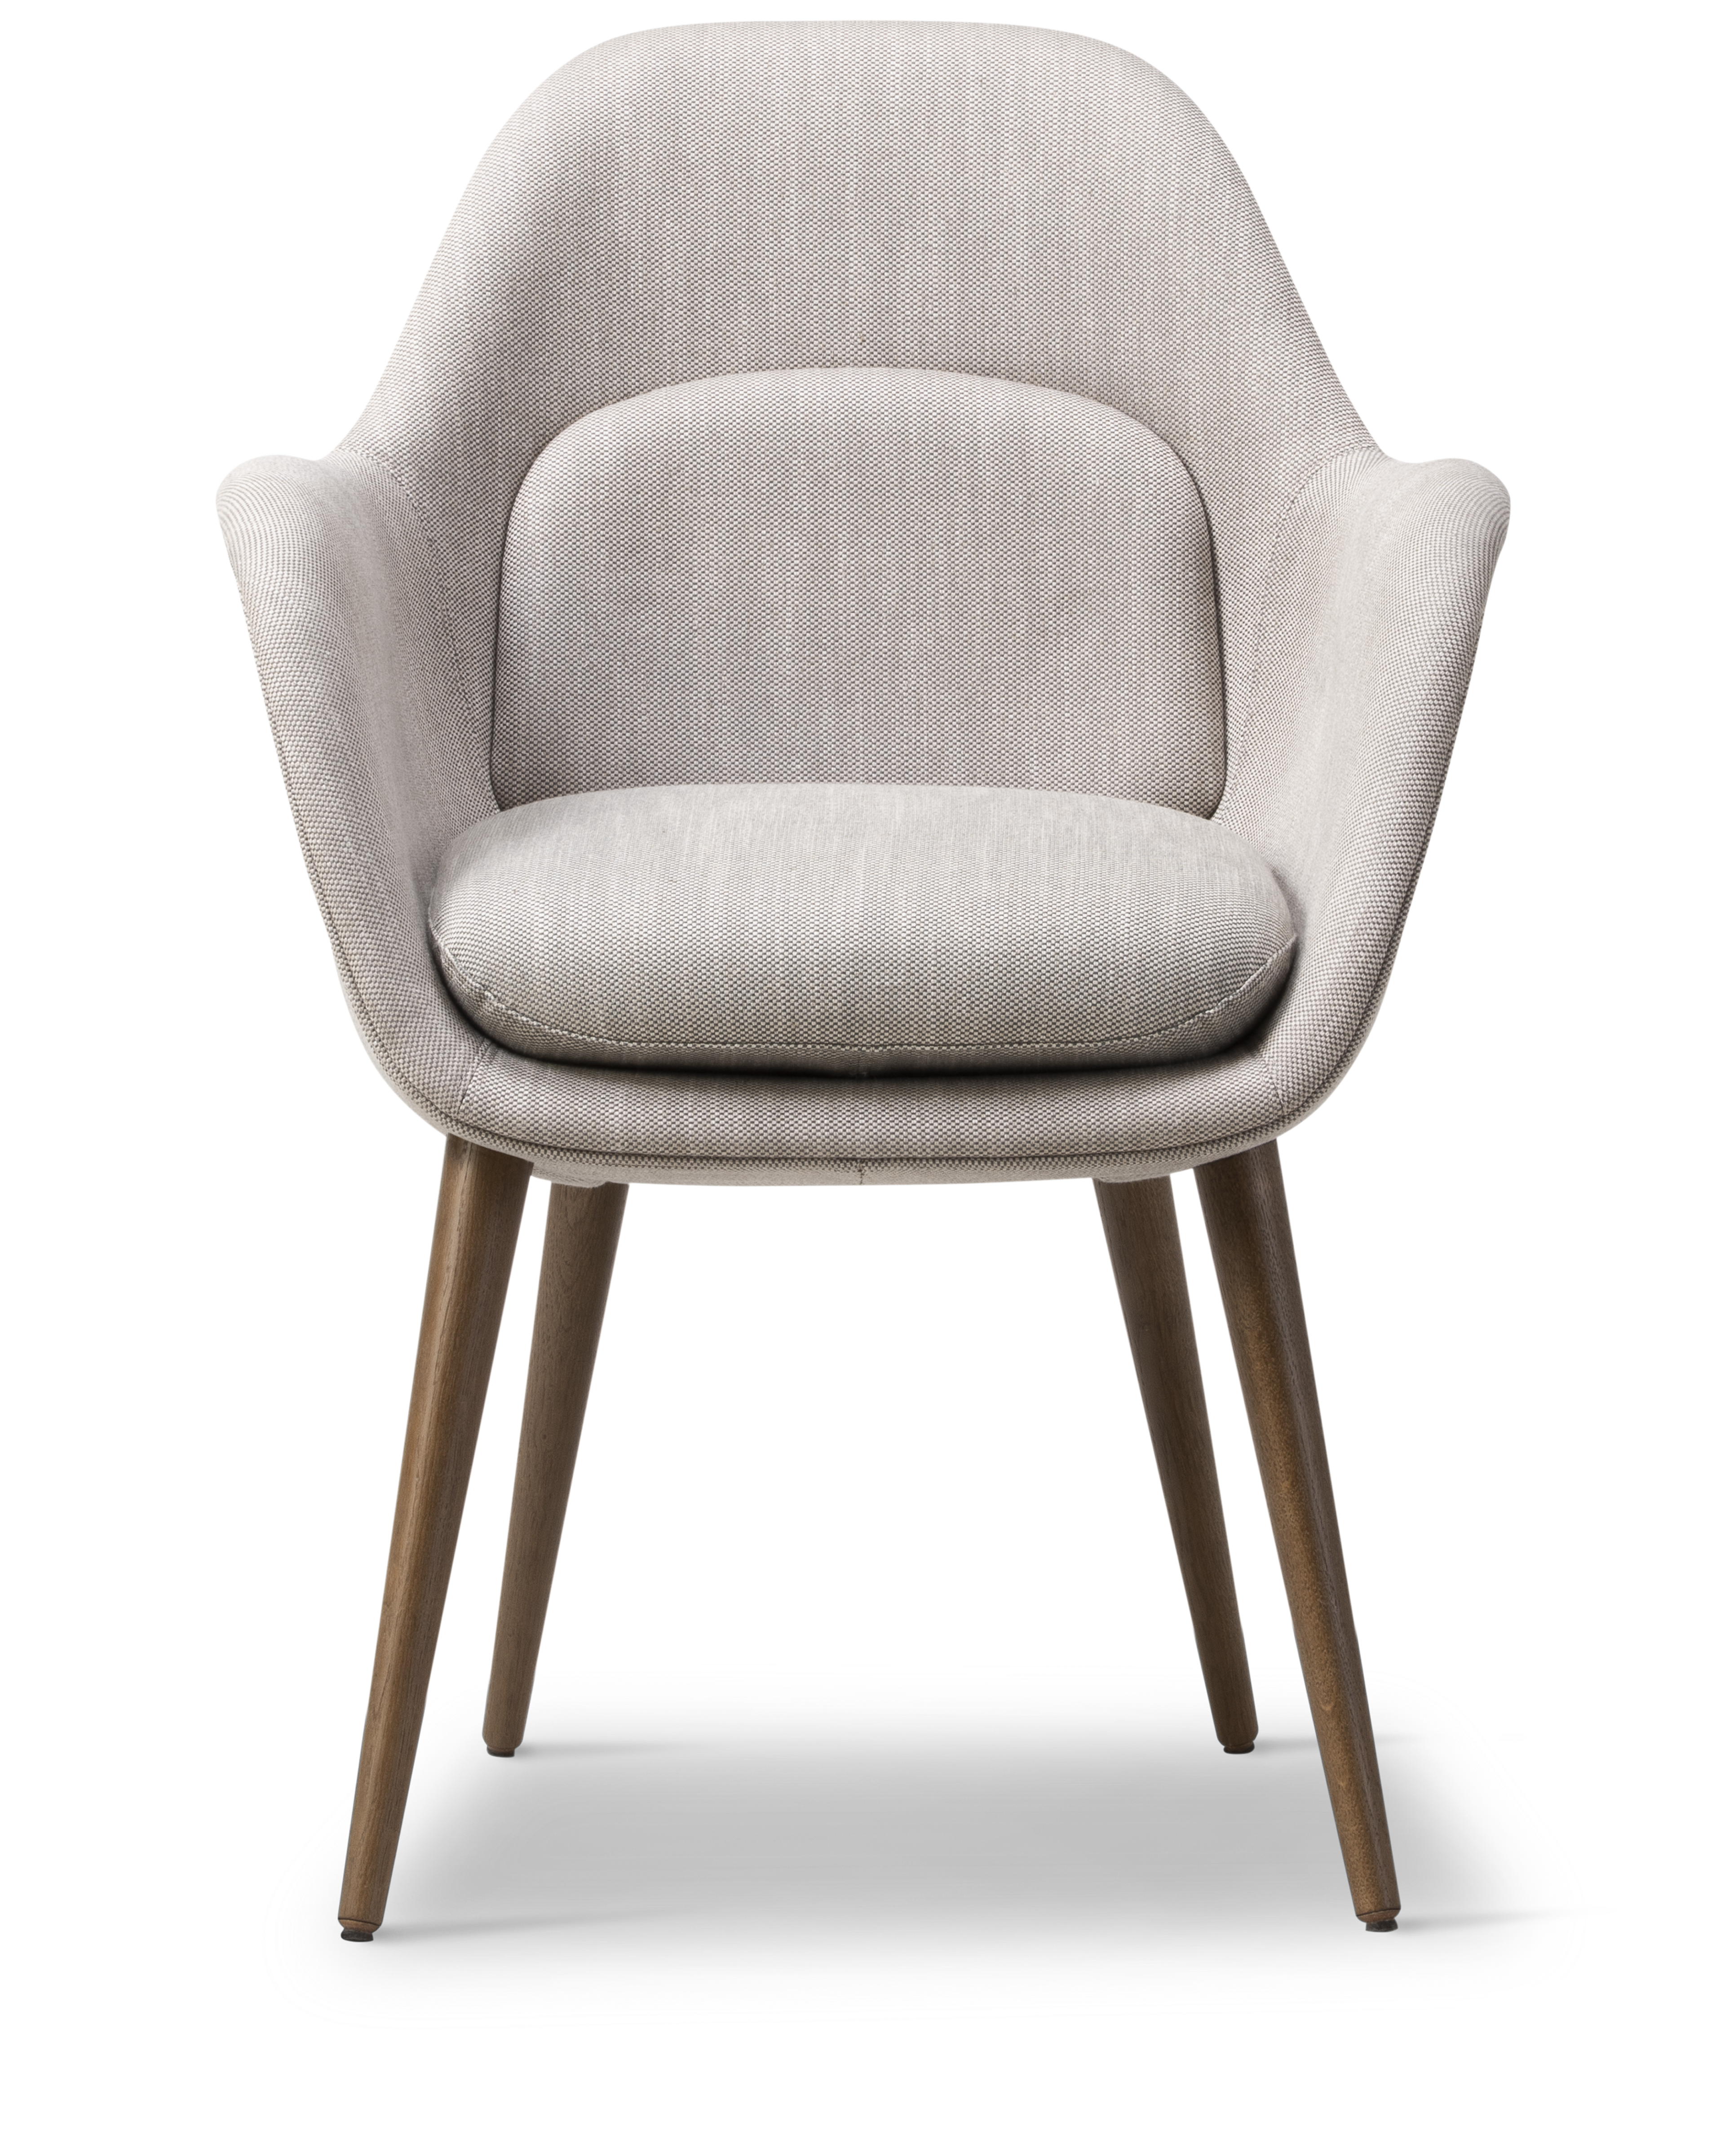 Swoon Dining Chair - Sinequanon 001 / Røget eg